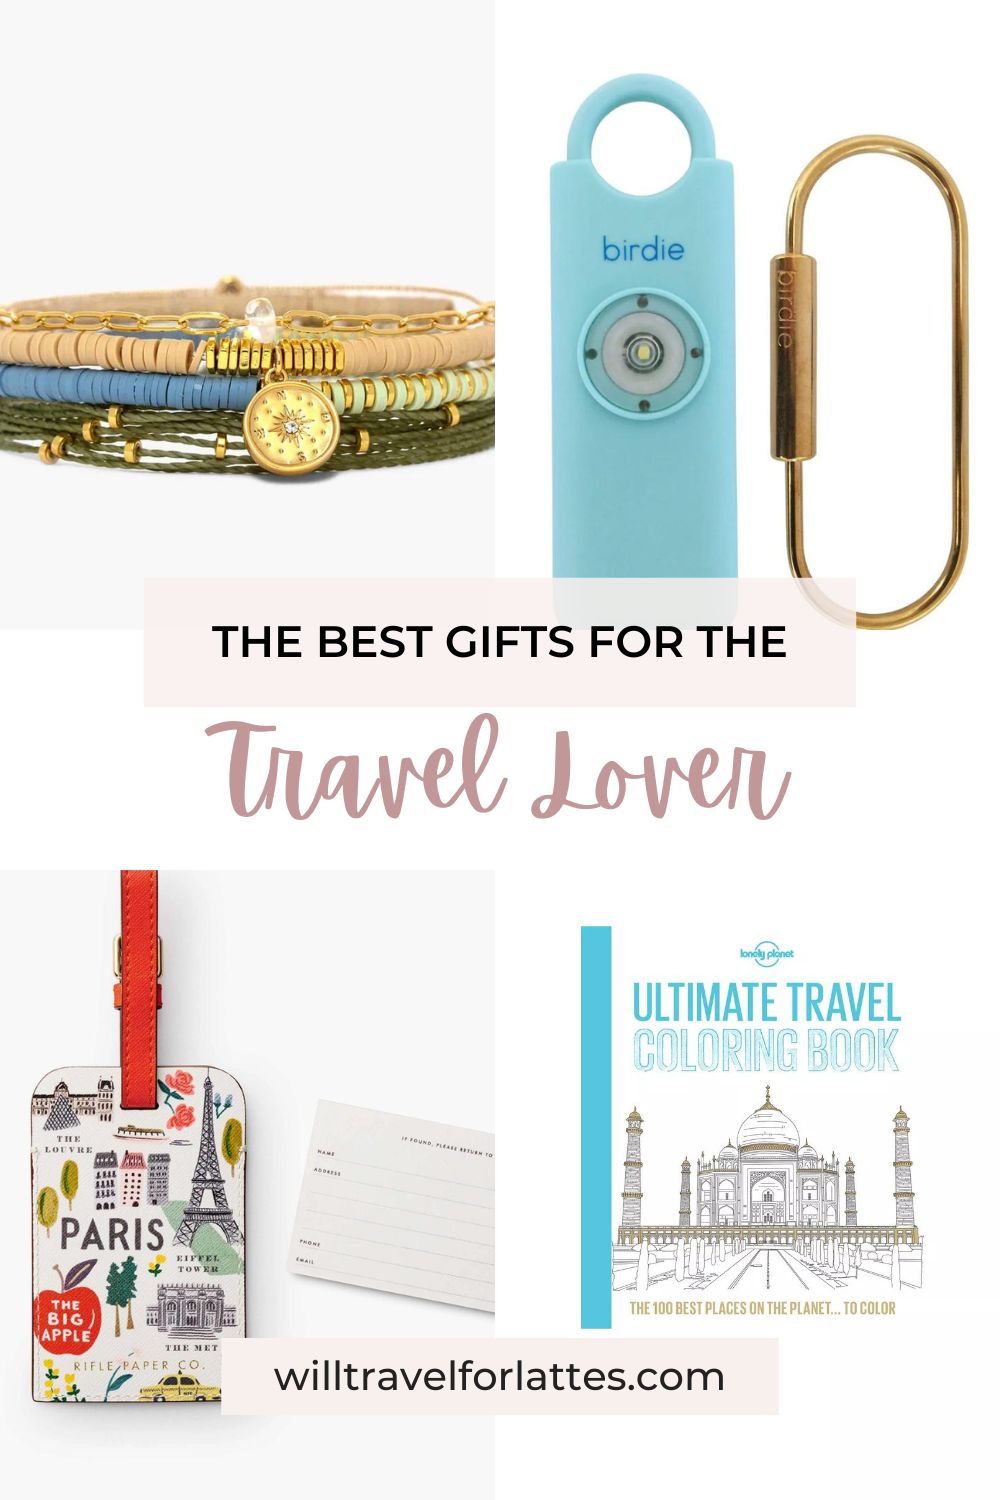 Four gifts for the travel lover including a green and gold bracelet pack from Pura Vida, a blue personal alarm from Birdie, a colorful luggage tag featuring famous landmarks from Rifle Paper Co, and a Lonely Planet Ultimate Travel Coloring Book